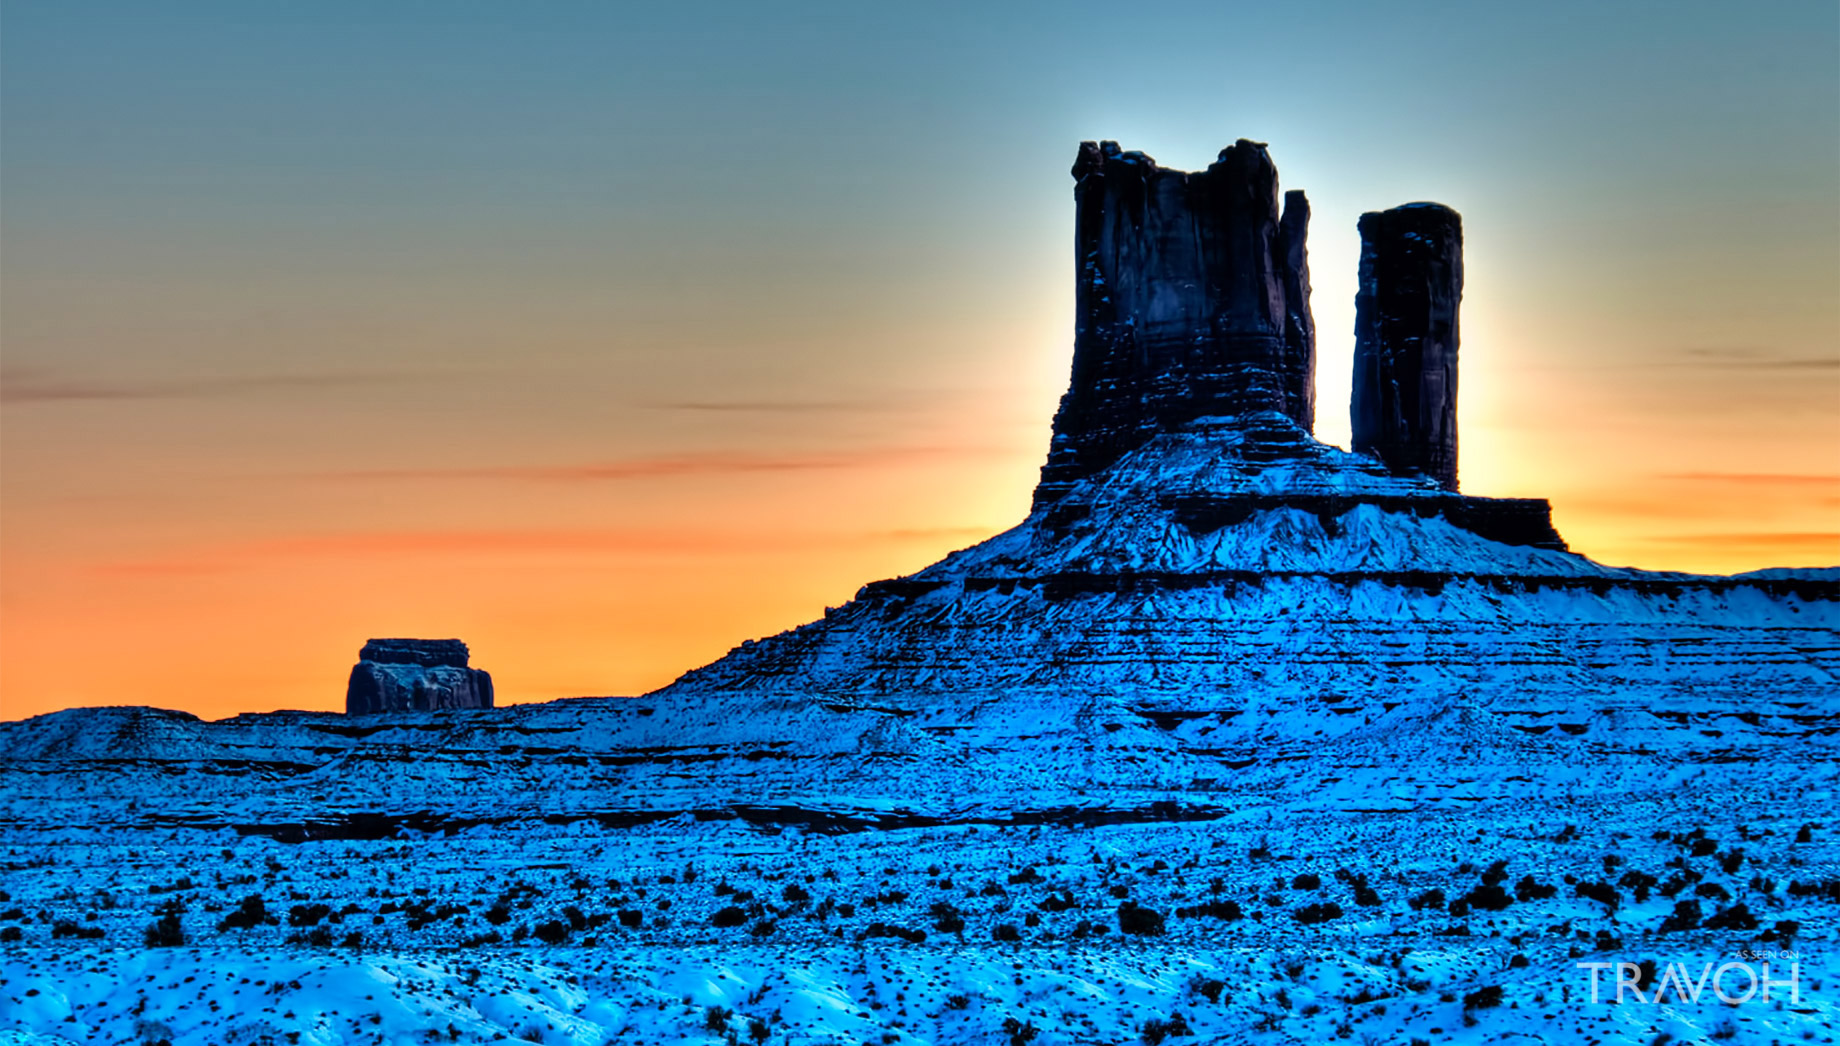 Monument Valley - A Daunting Region of the Colorado Plateau on the Arizona-Utah State Line